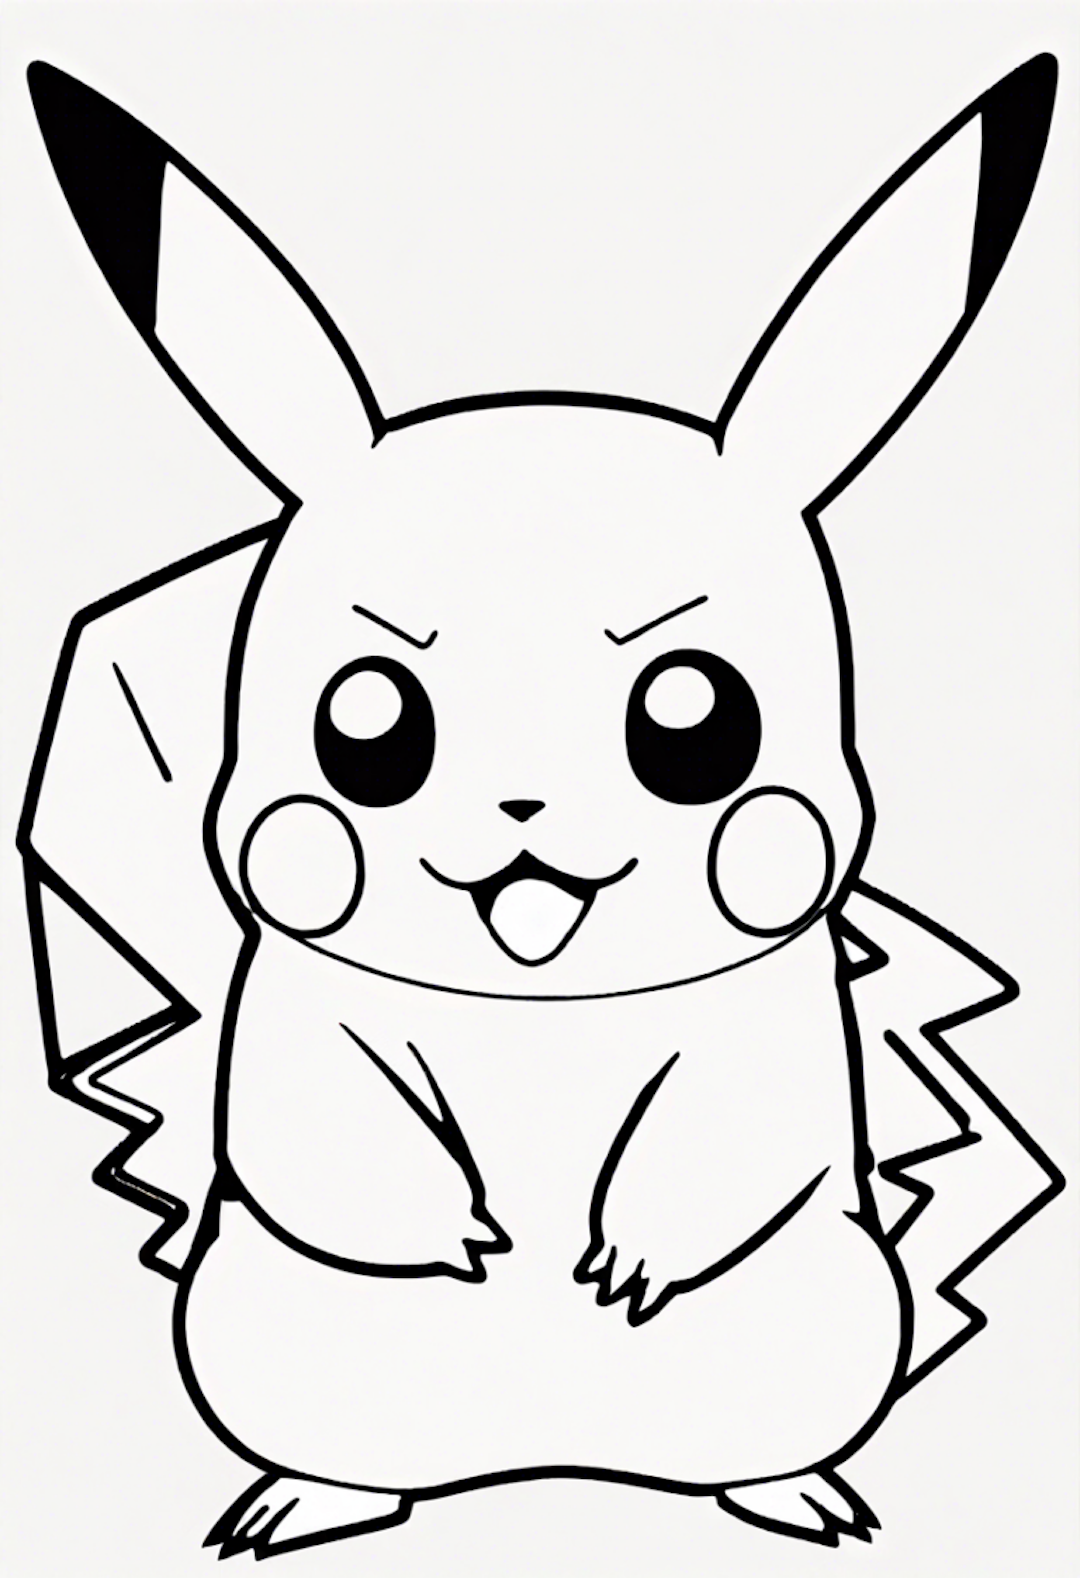 Pikachu’s Fun Coloring Adventure coloring pages